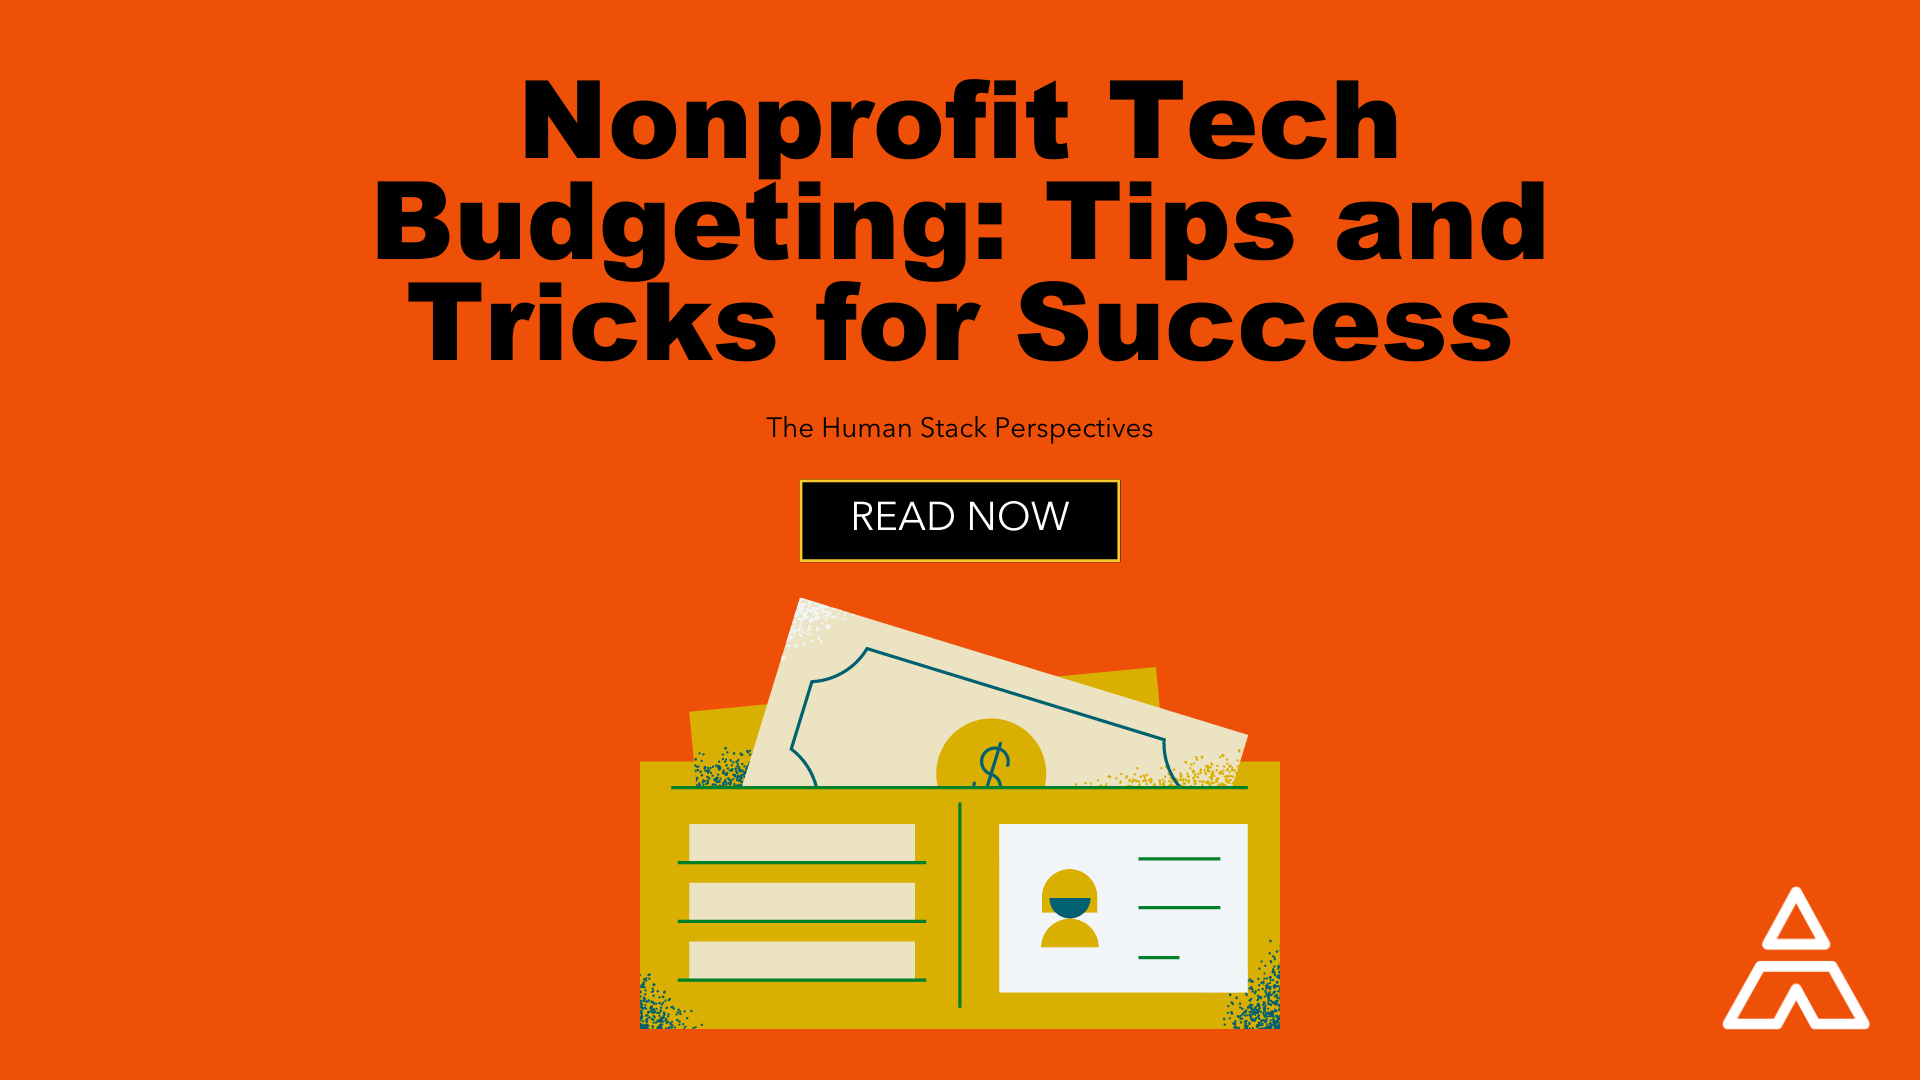 Nonprofit Tech Budgeting: Tips and Tricks for Success